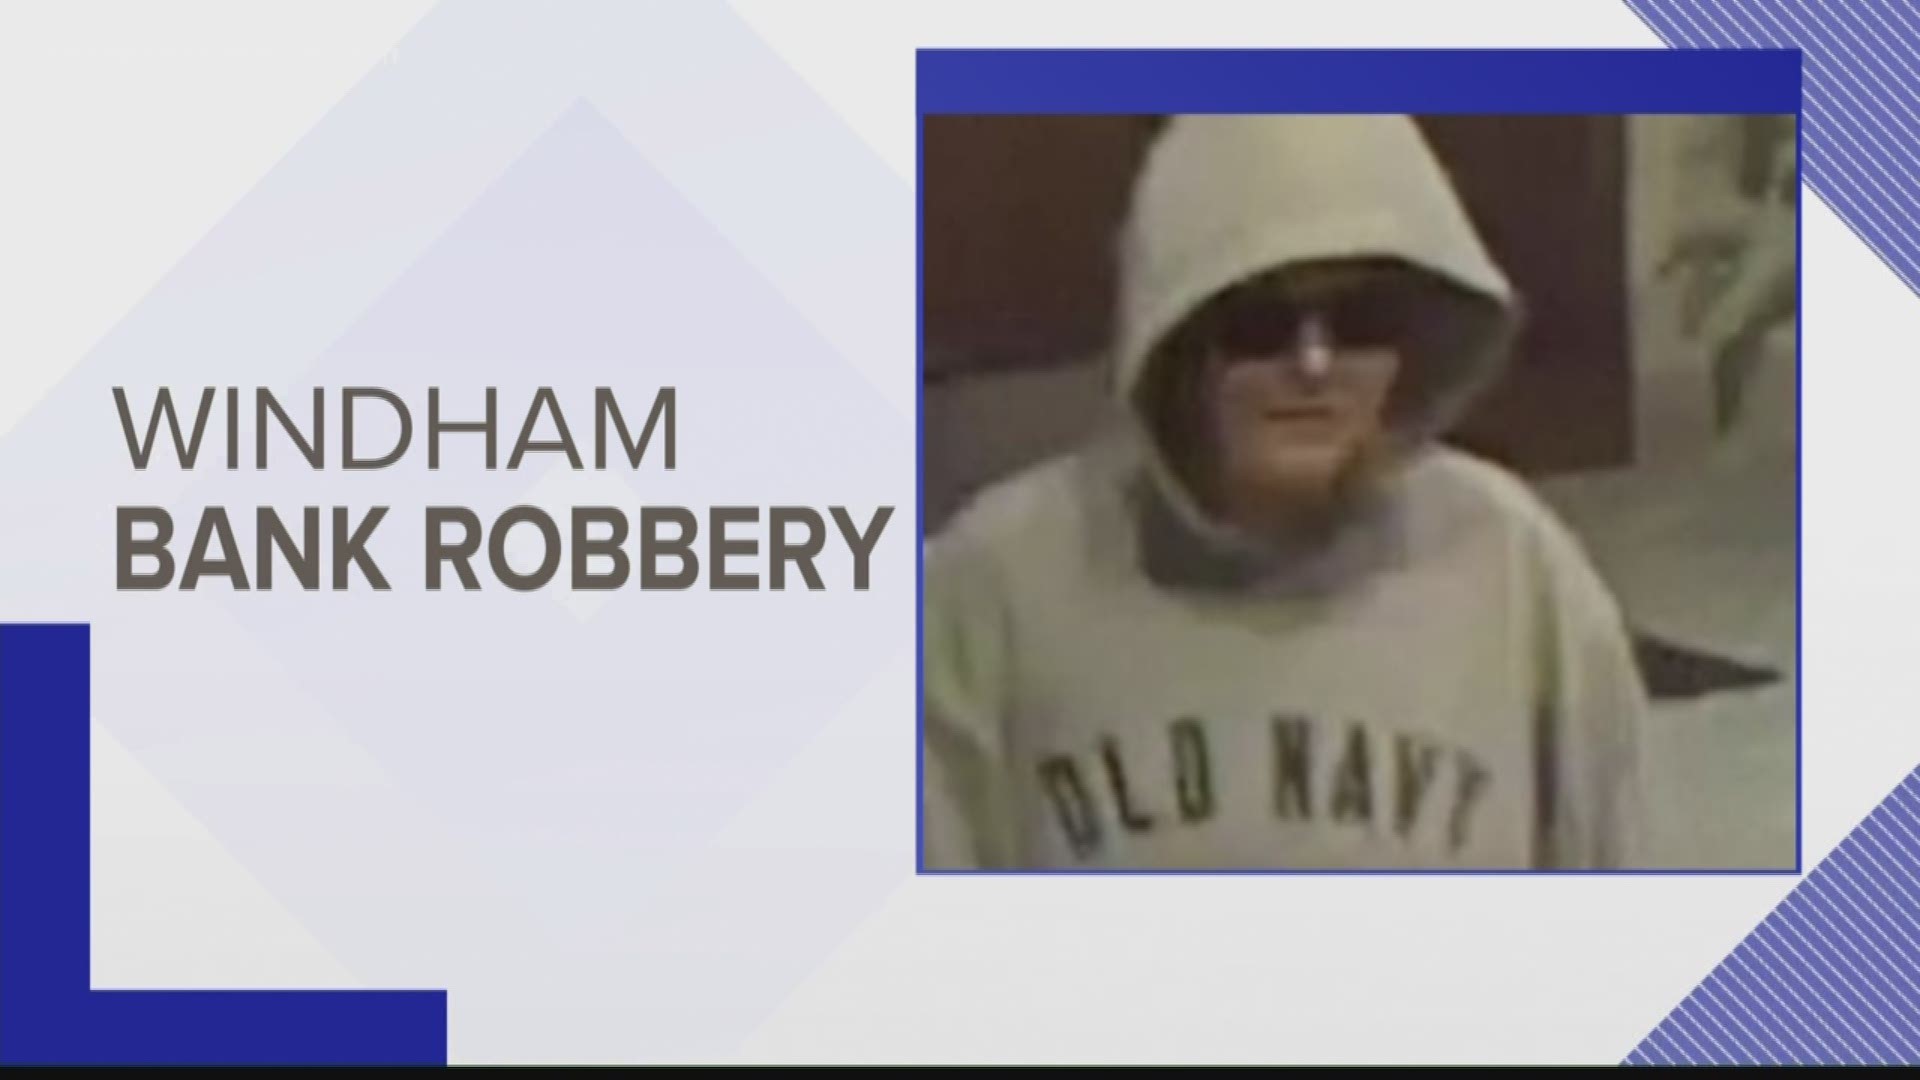 Windham bank robbery suspect sought by police